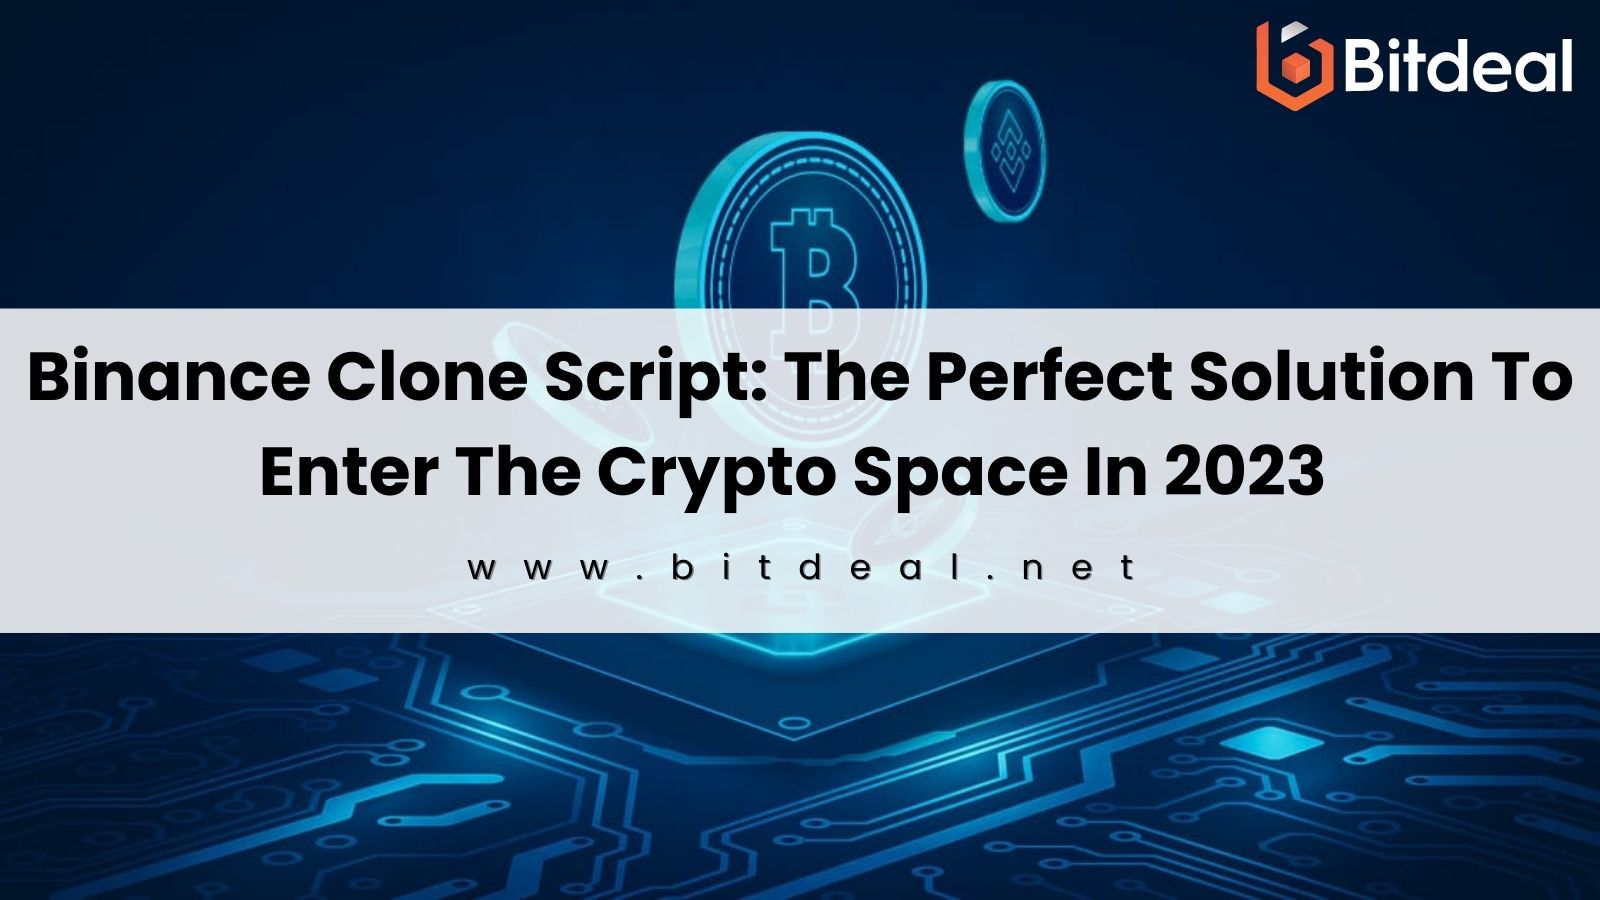 Binance Clone Script: The Perfect Solution To Enter The Crypto Space In 2023